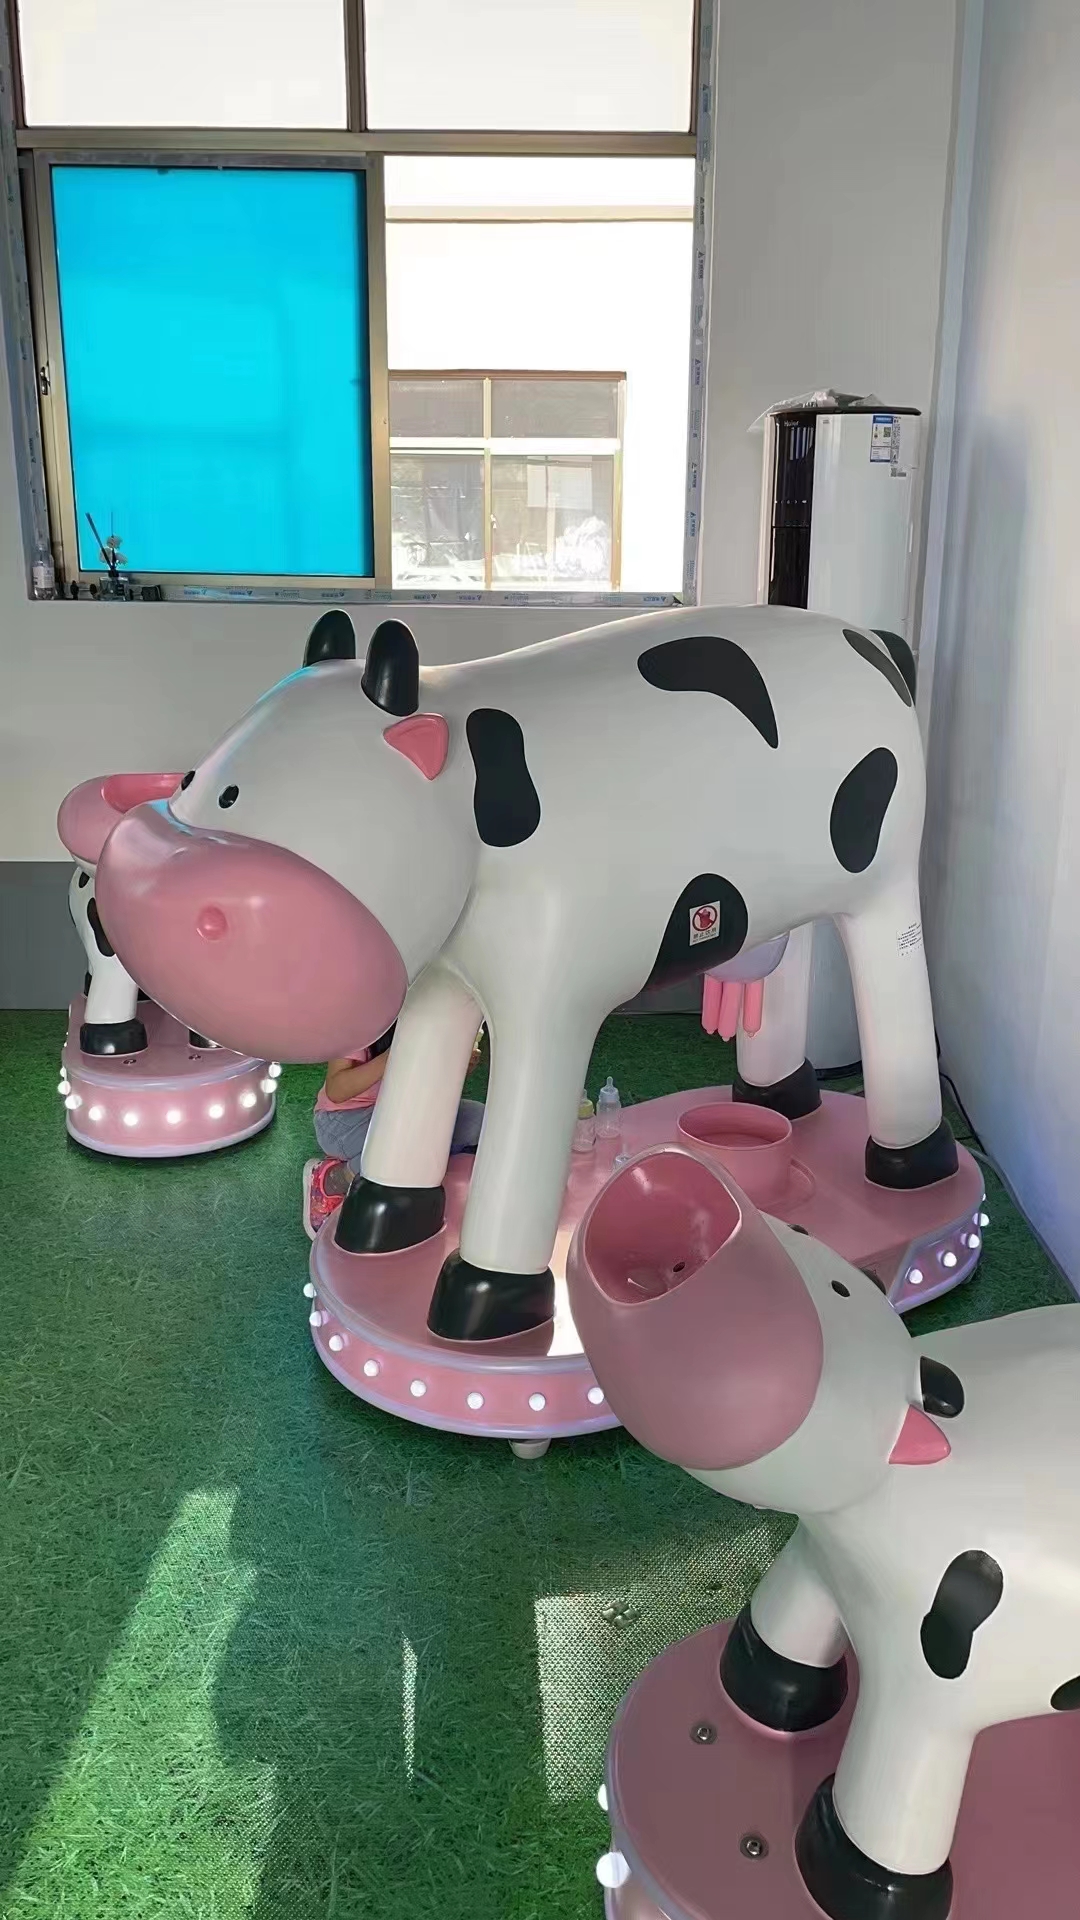 Bettaplay Indoor Playground Kids Interactive Game Cow Role Play Farm Softplay Kids Playground for Kindergarten